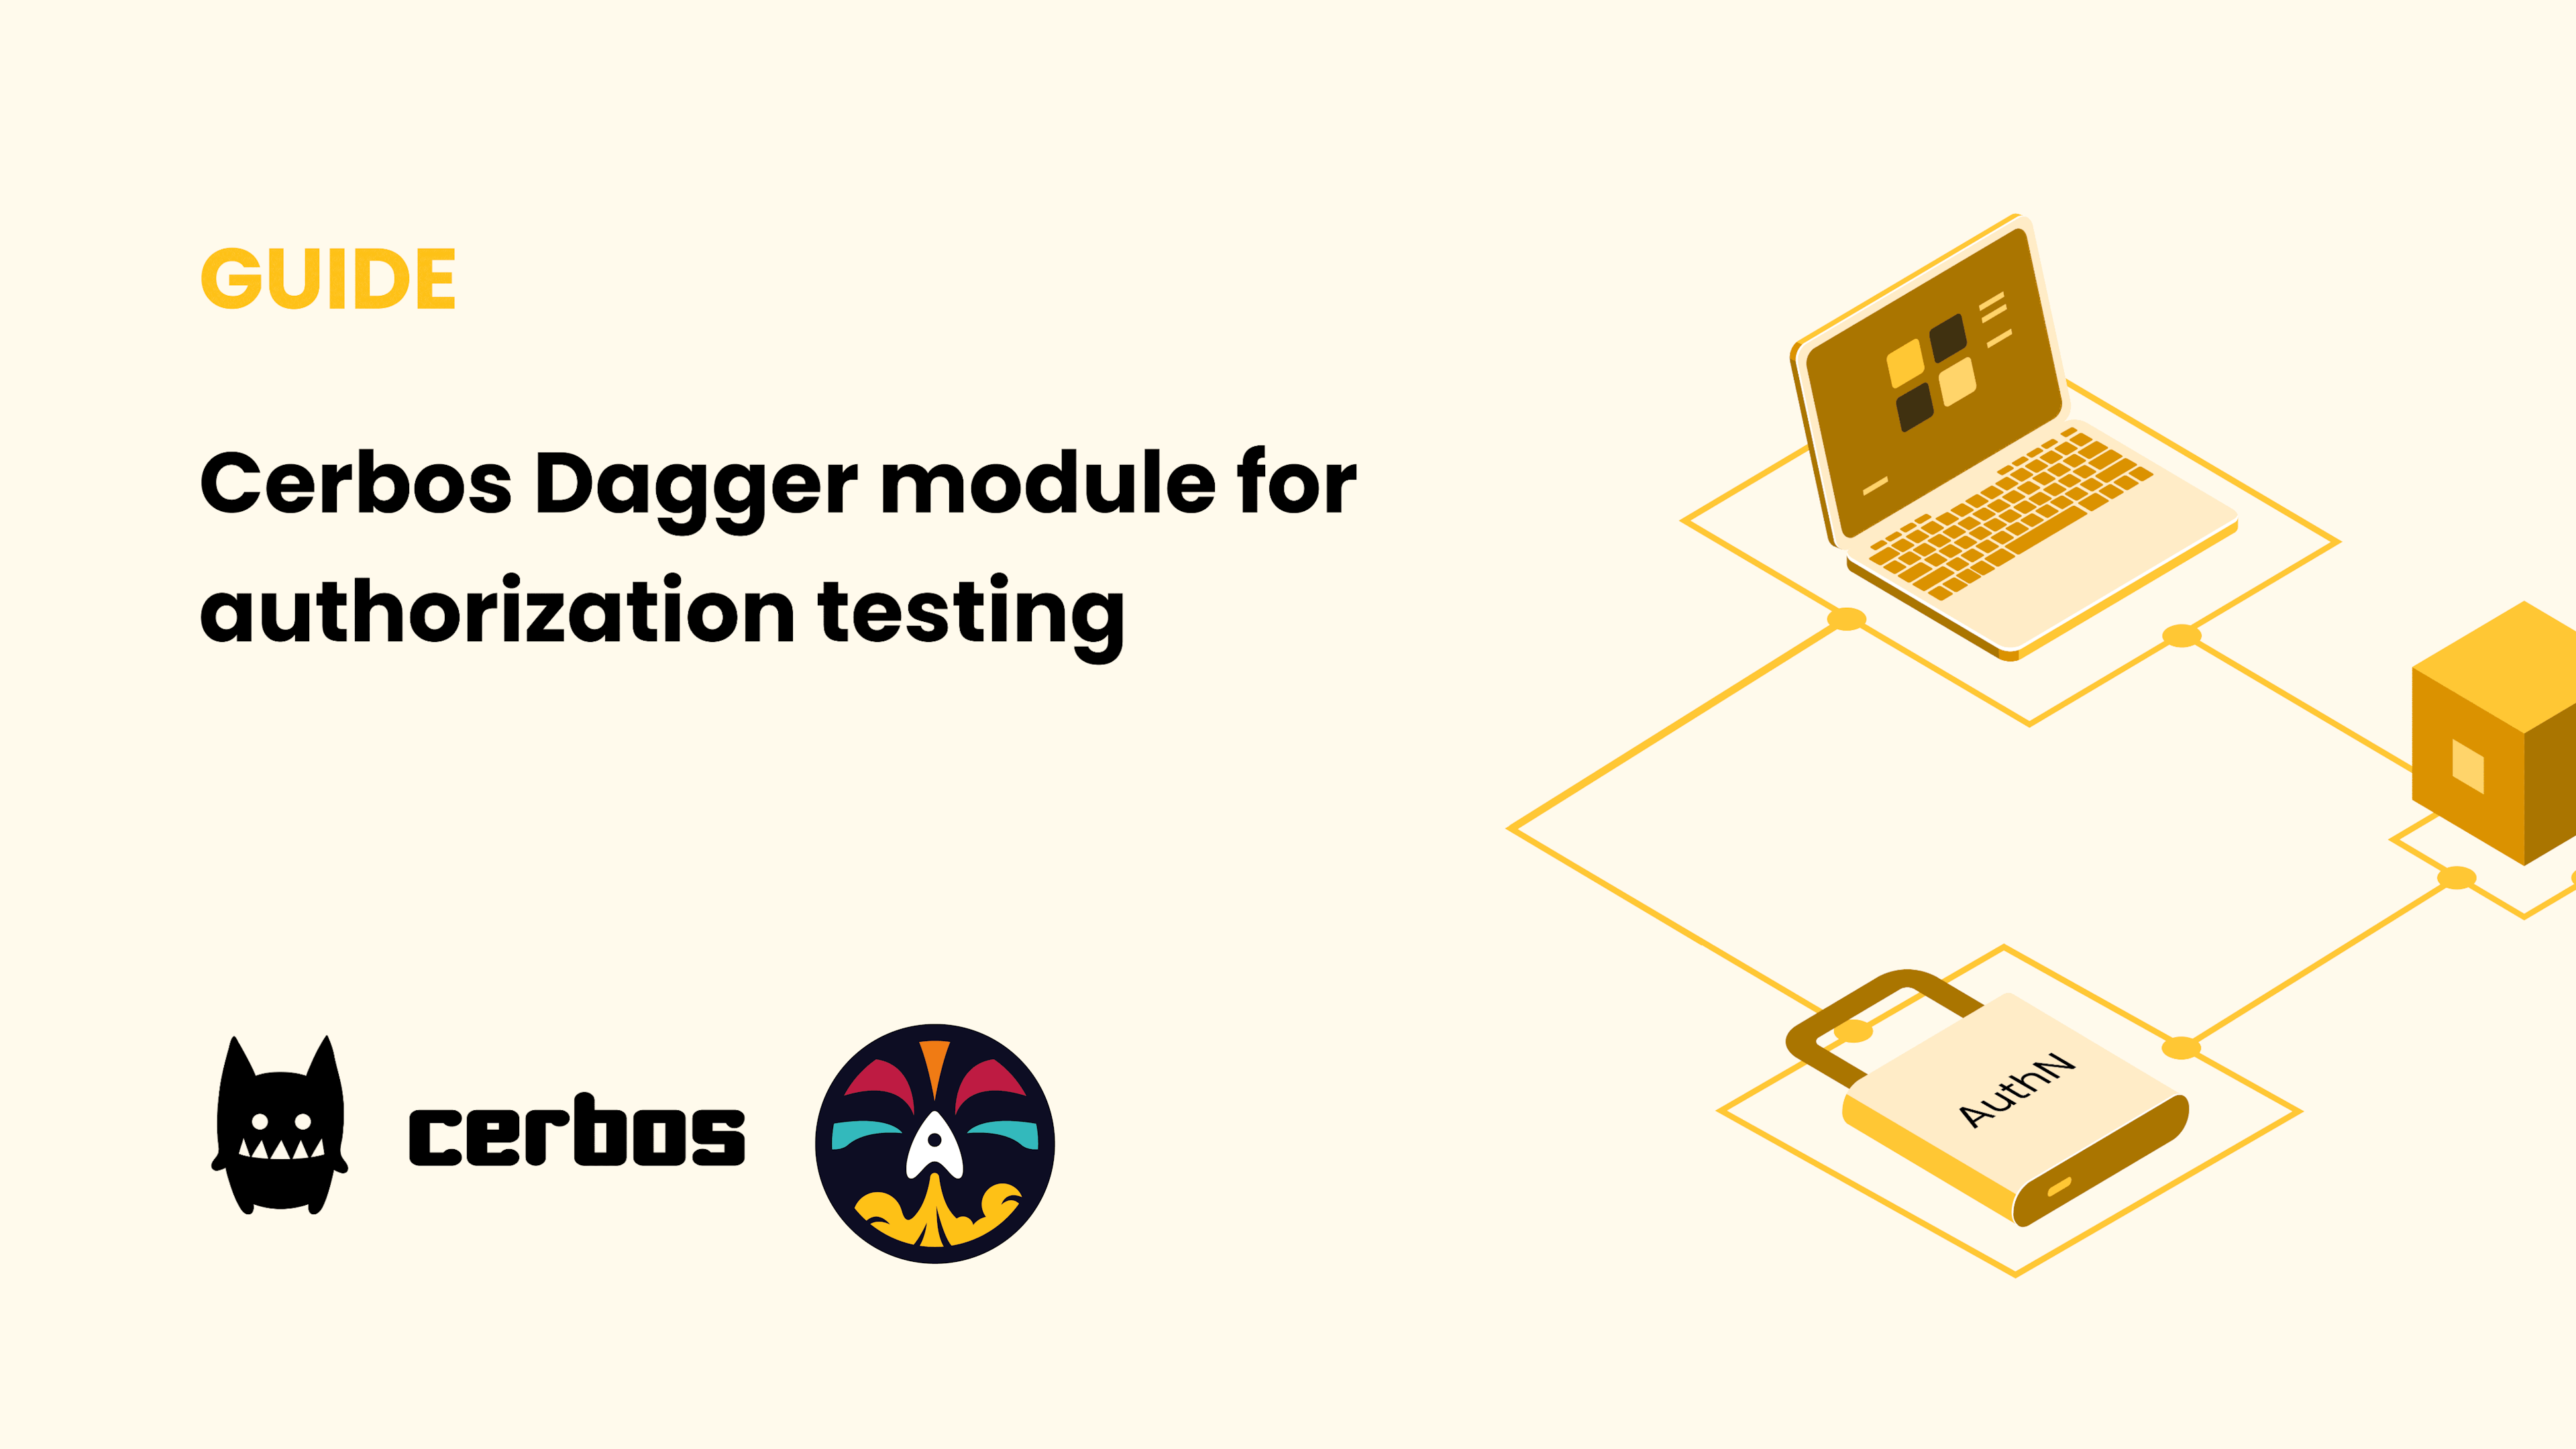 Cerbos Dagger module for authorization testing